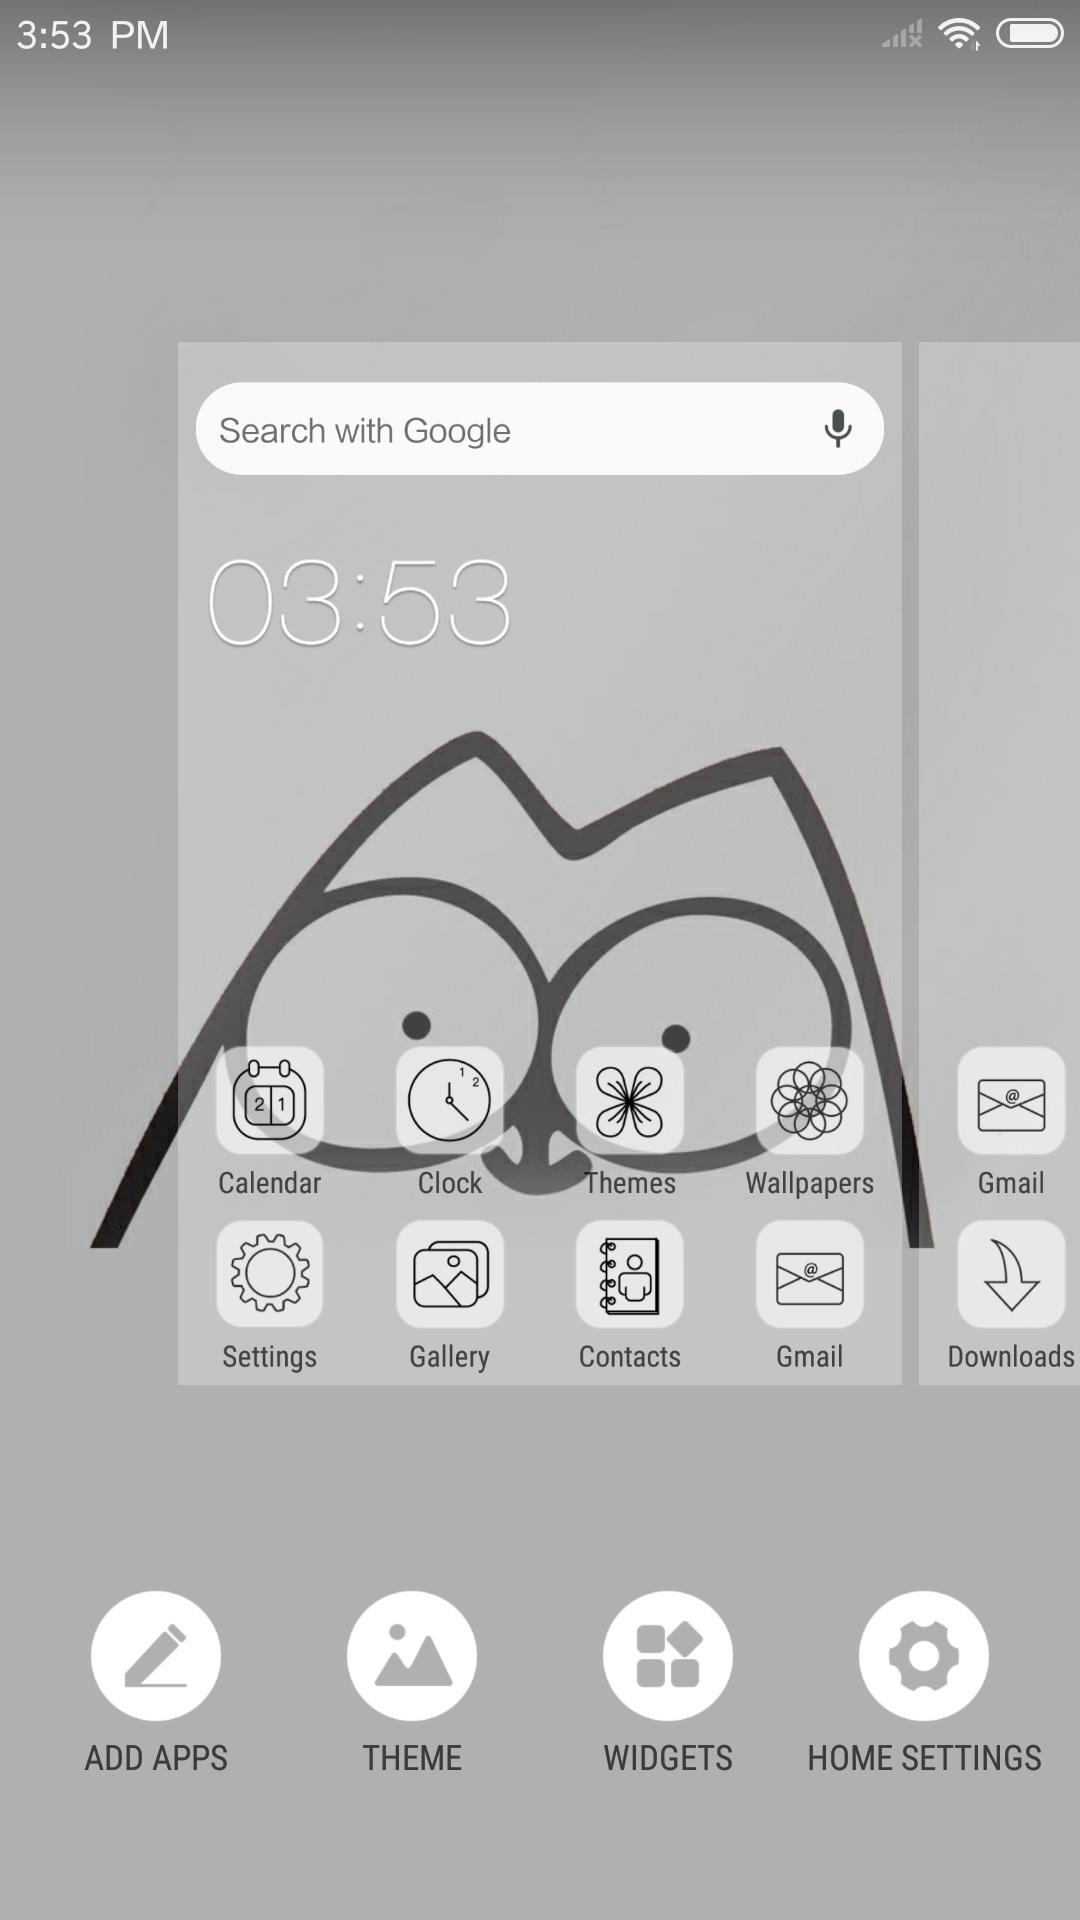 iLauncher for OS 13 - Stylish Theme and Wallpaper 3.2.0 Screenshot 2